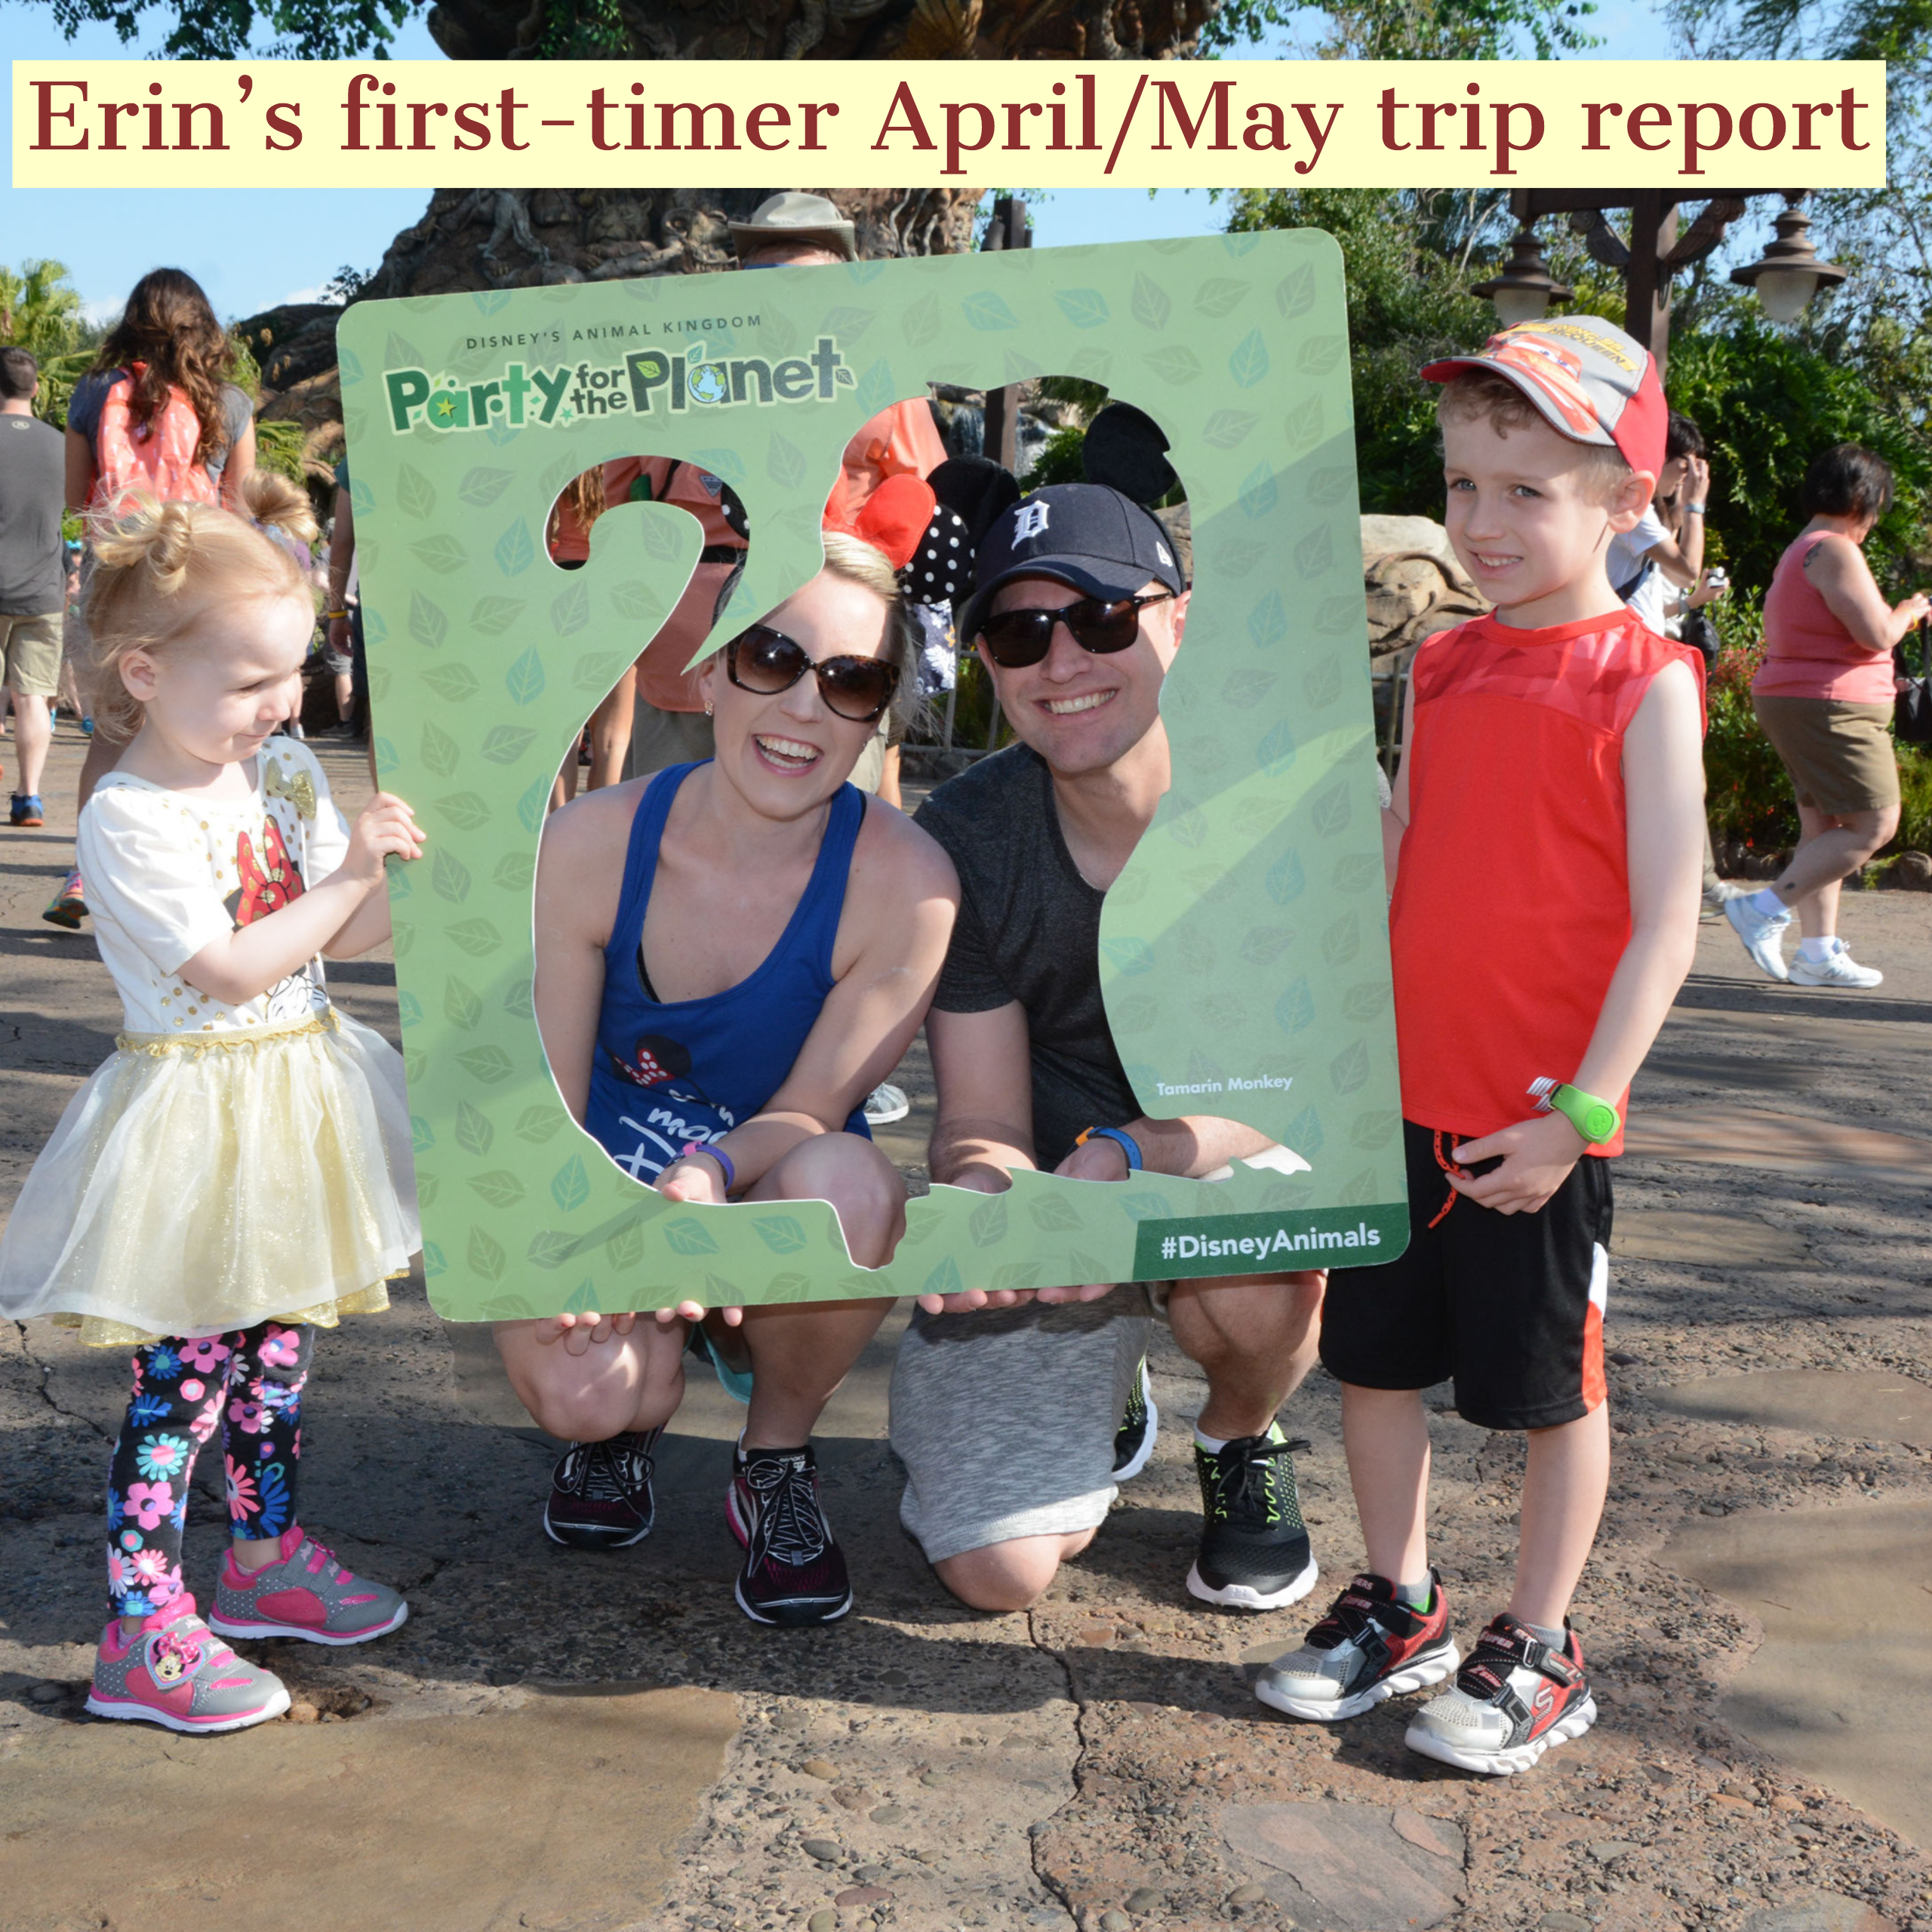 Erin’s first-timer April/May trip report – PREP174